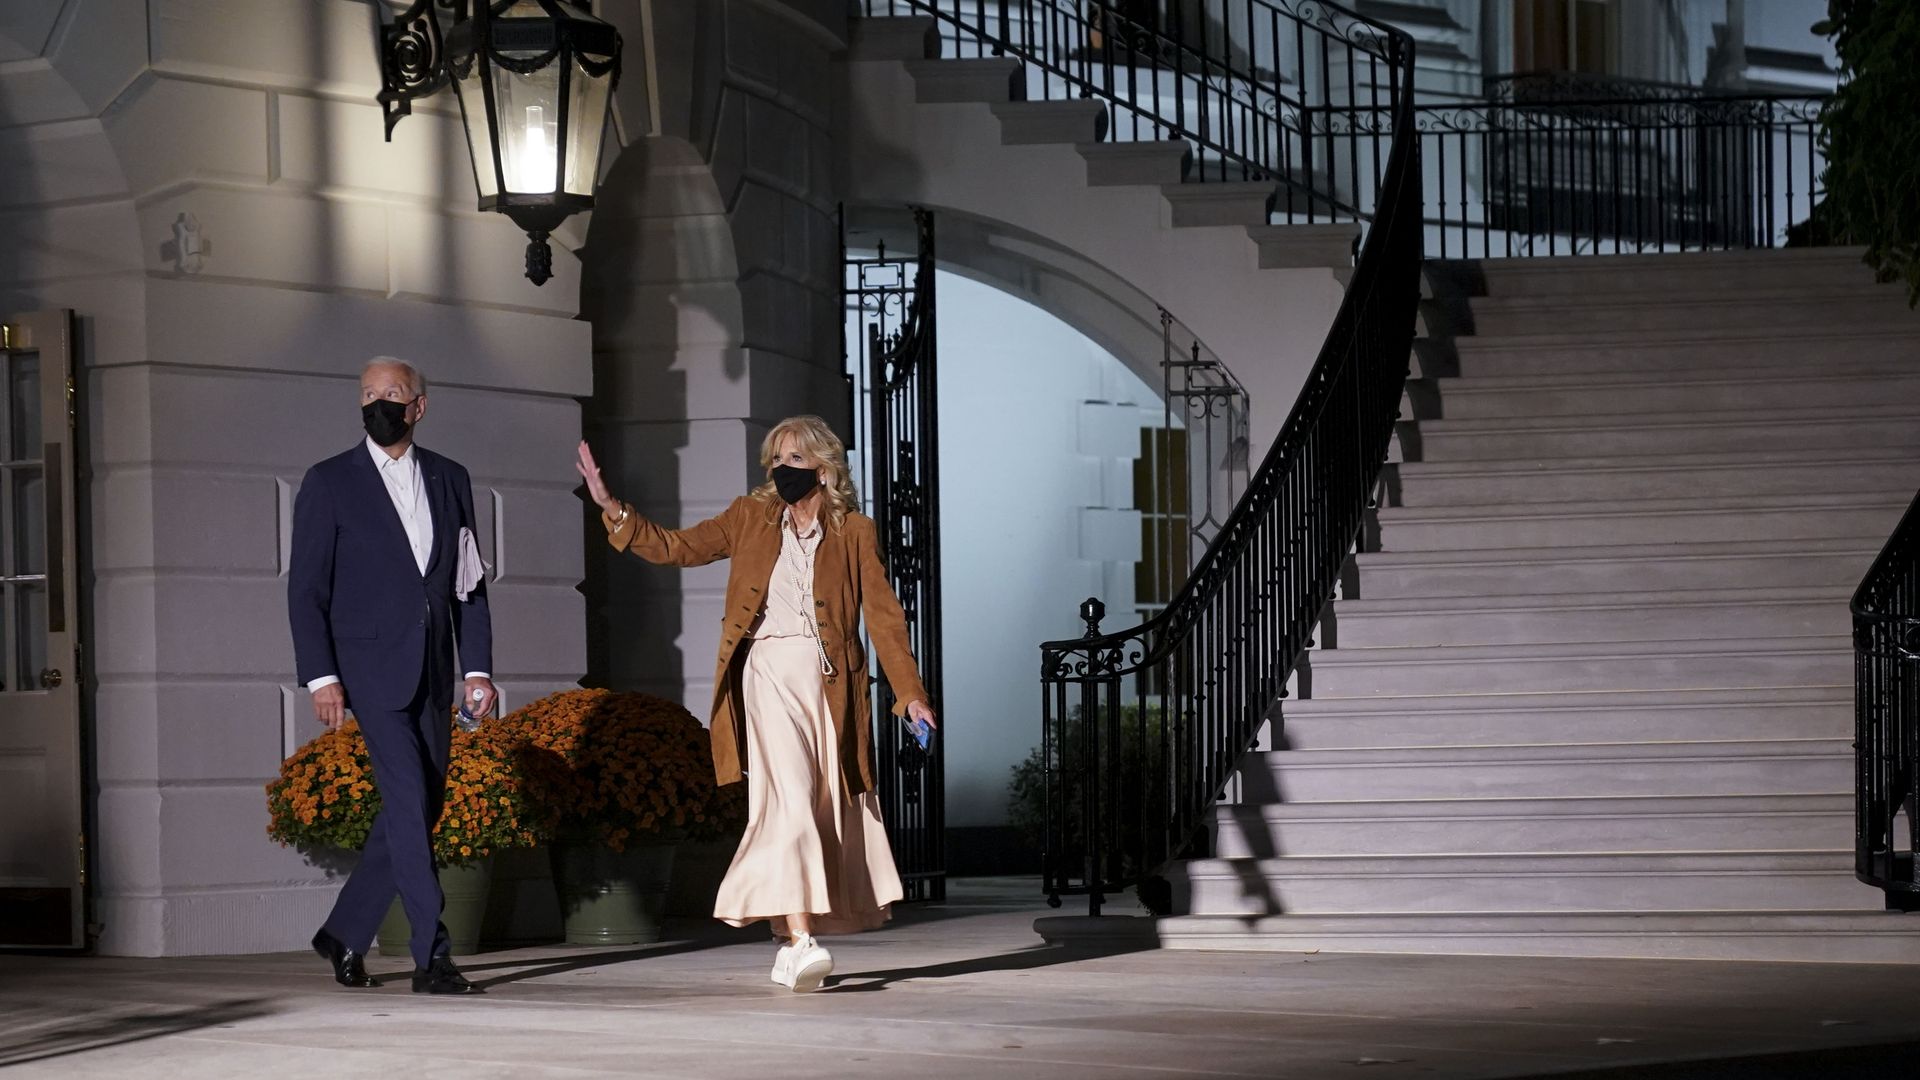 President Joe Biden and First Lady Jill Biden walk on the South Lawn of the White House before boarding Marine One in Washington, D.C., U.S., on Friday, Oct. 22, 2021. 